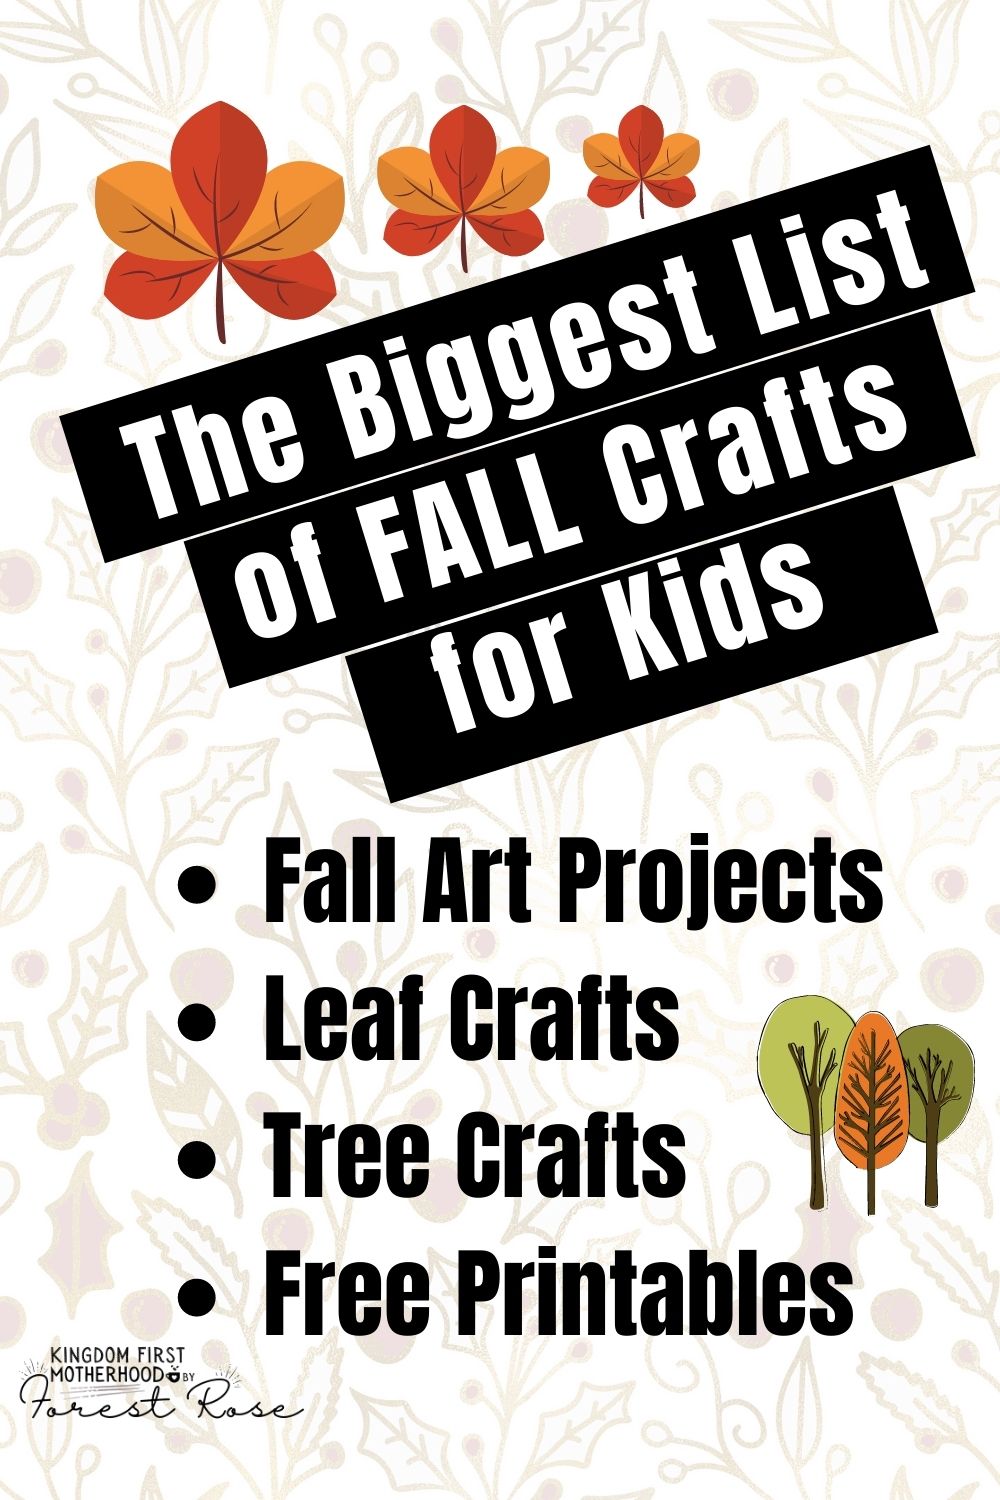 expansive list of Fall Art Projects, Fall Leaf Crafts, Fall Tree Crafts and even some free fall printables